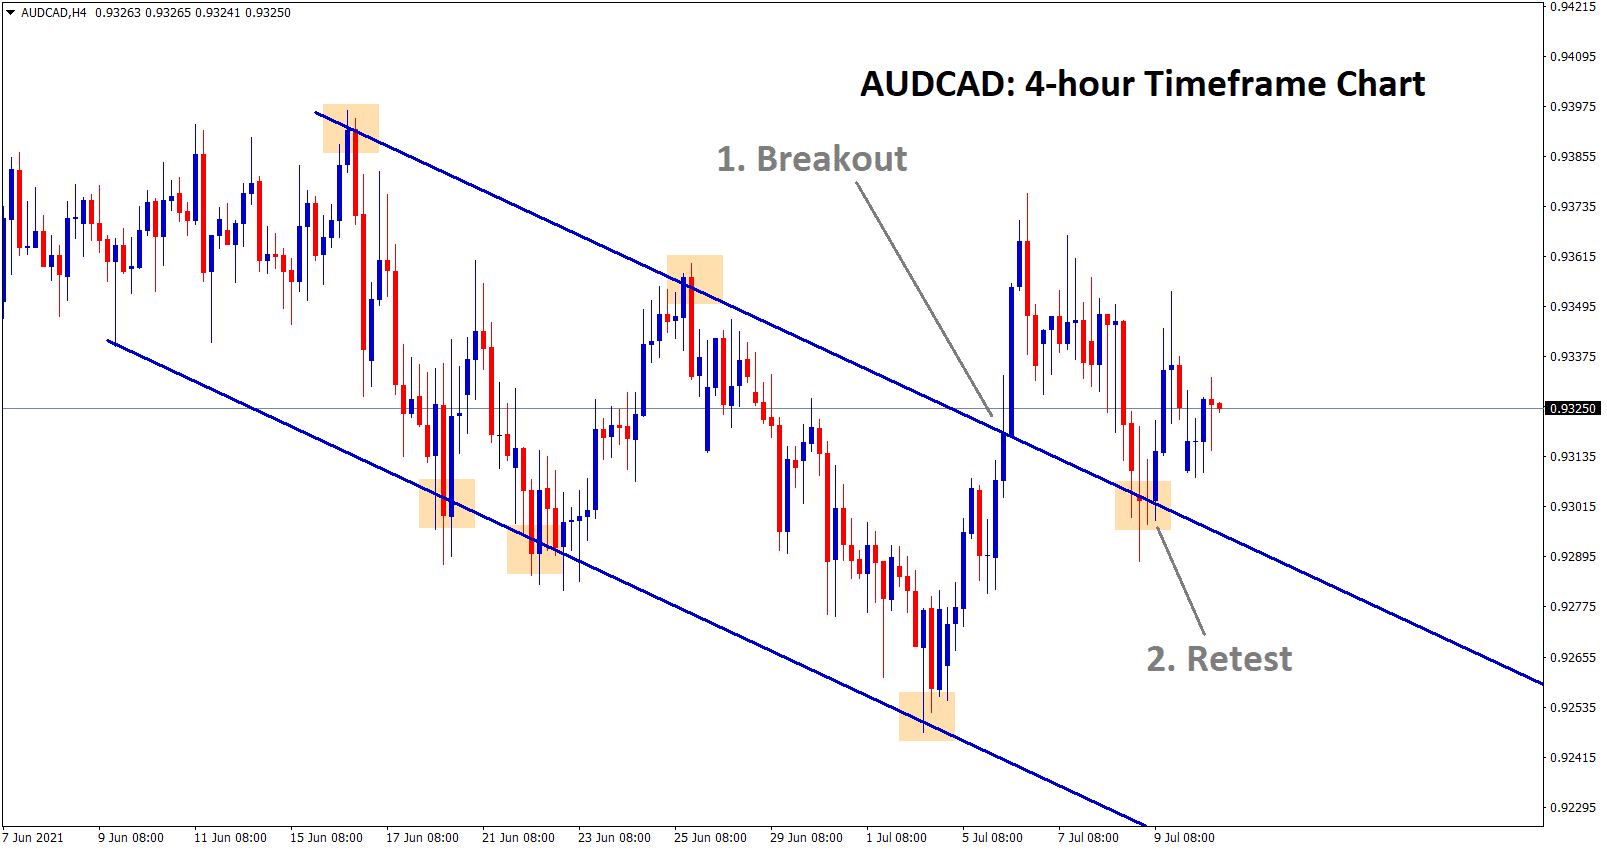 AUDCAD has broken and retested the descending channel now starts to bounce back